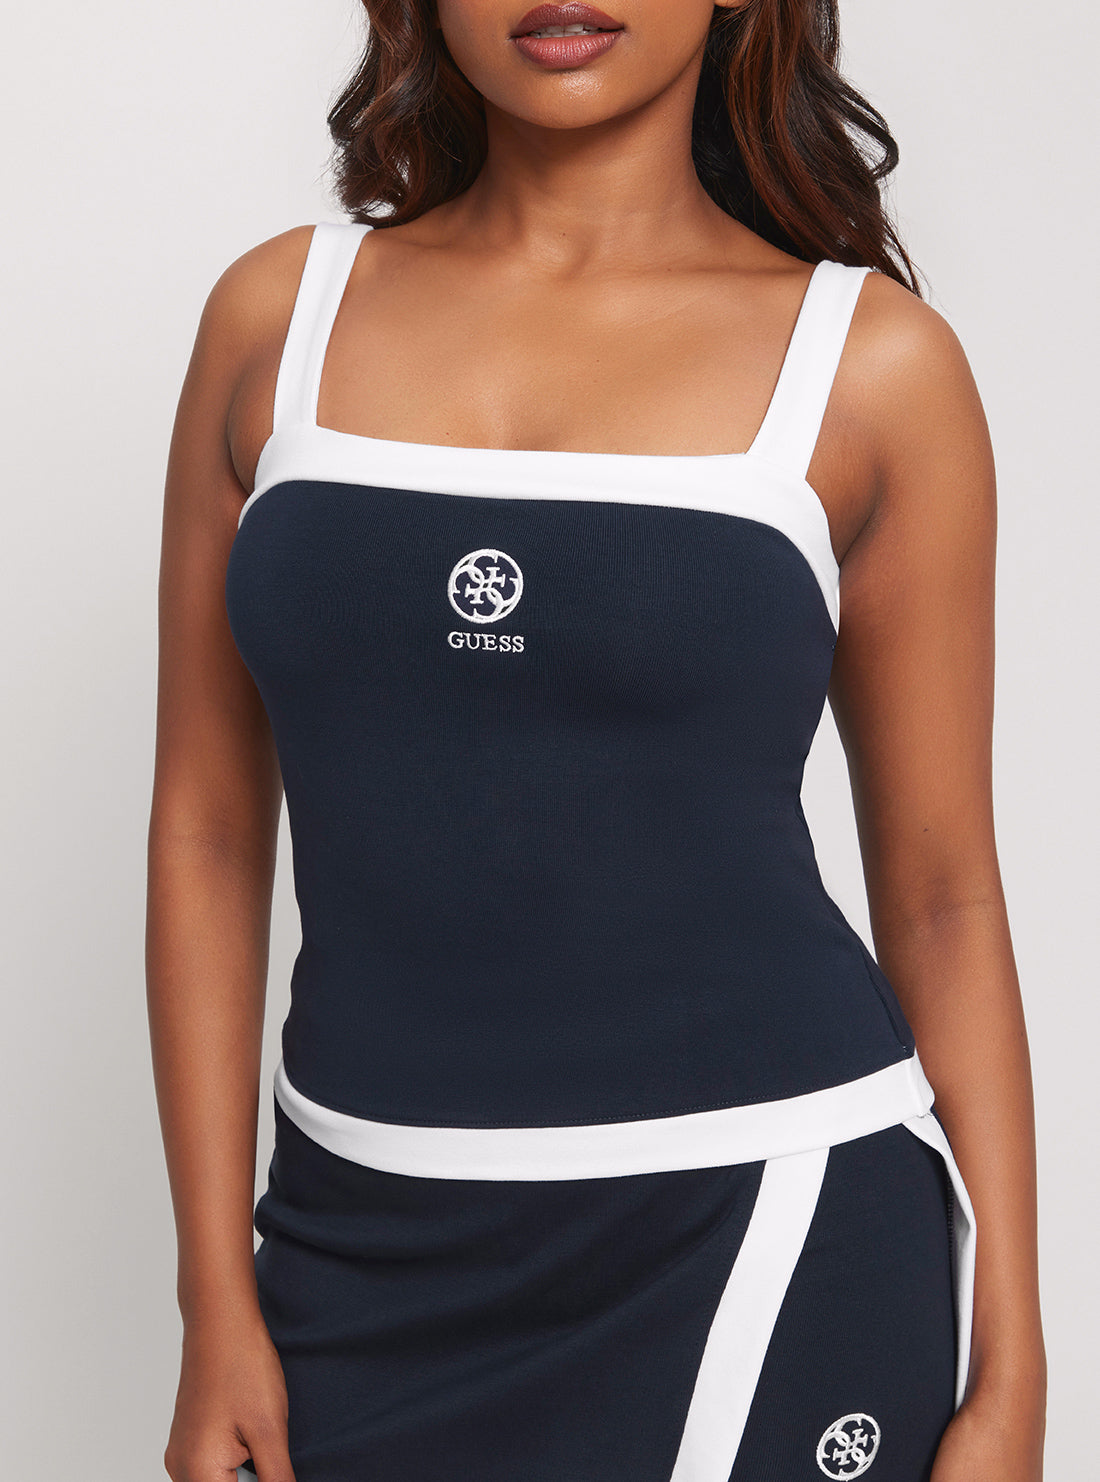 GUESS Navy Harper Active Tank Top detail view